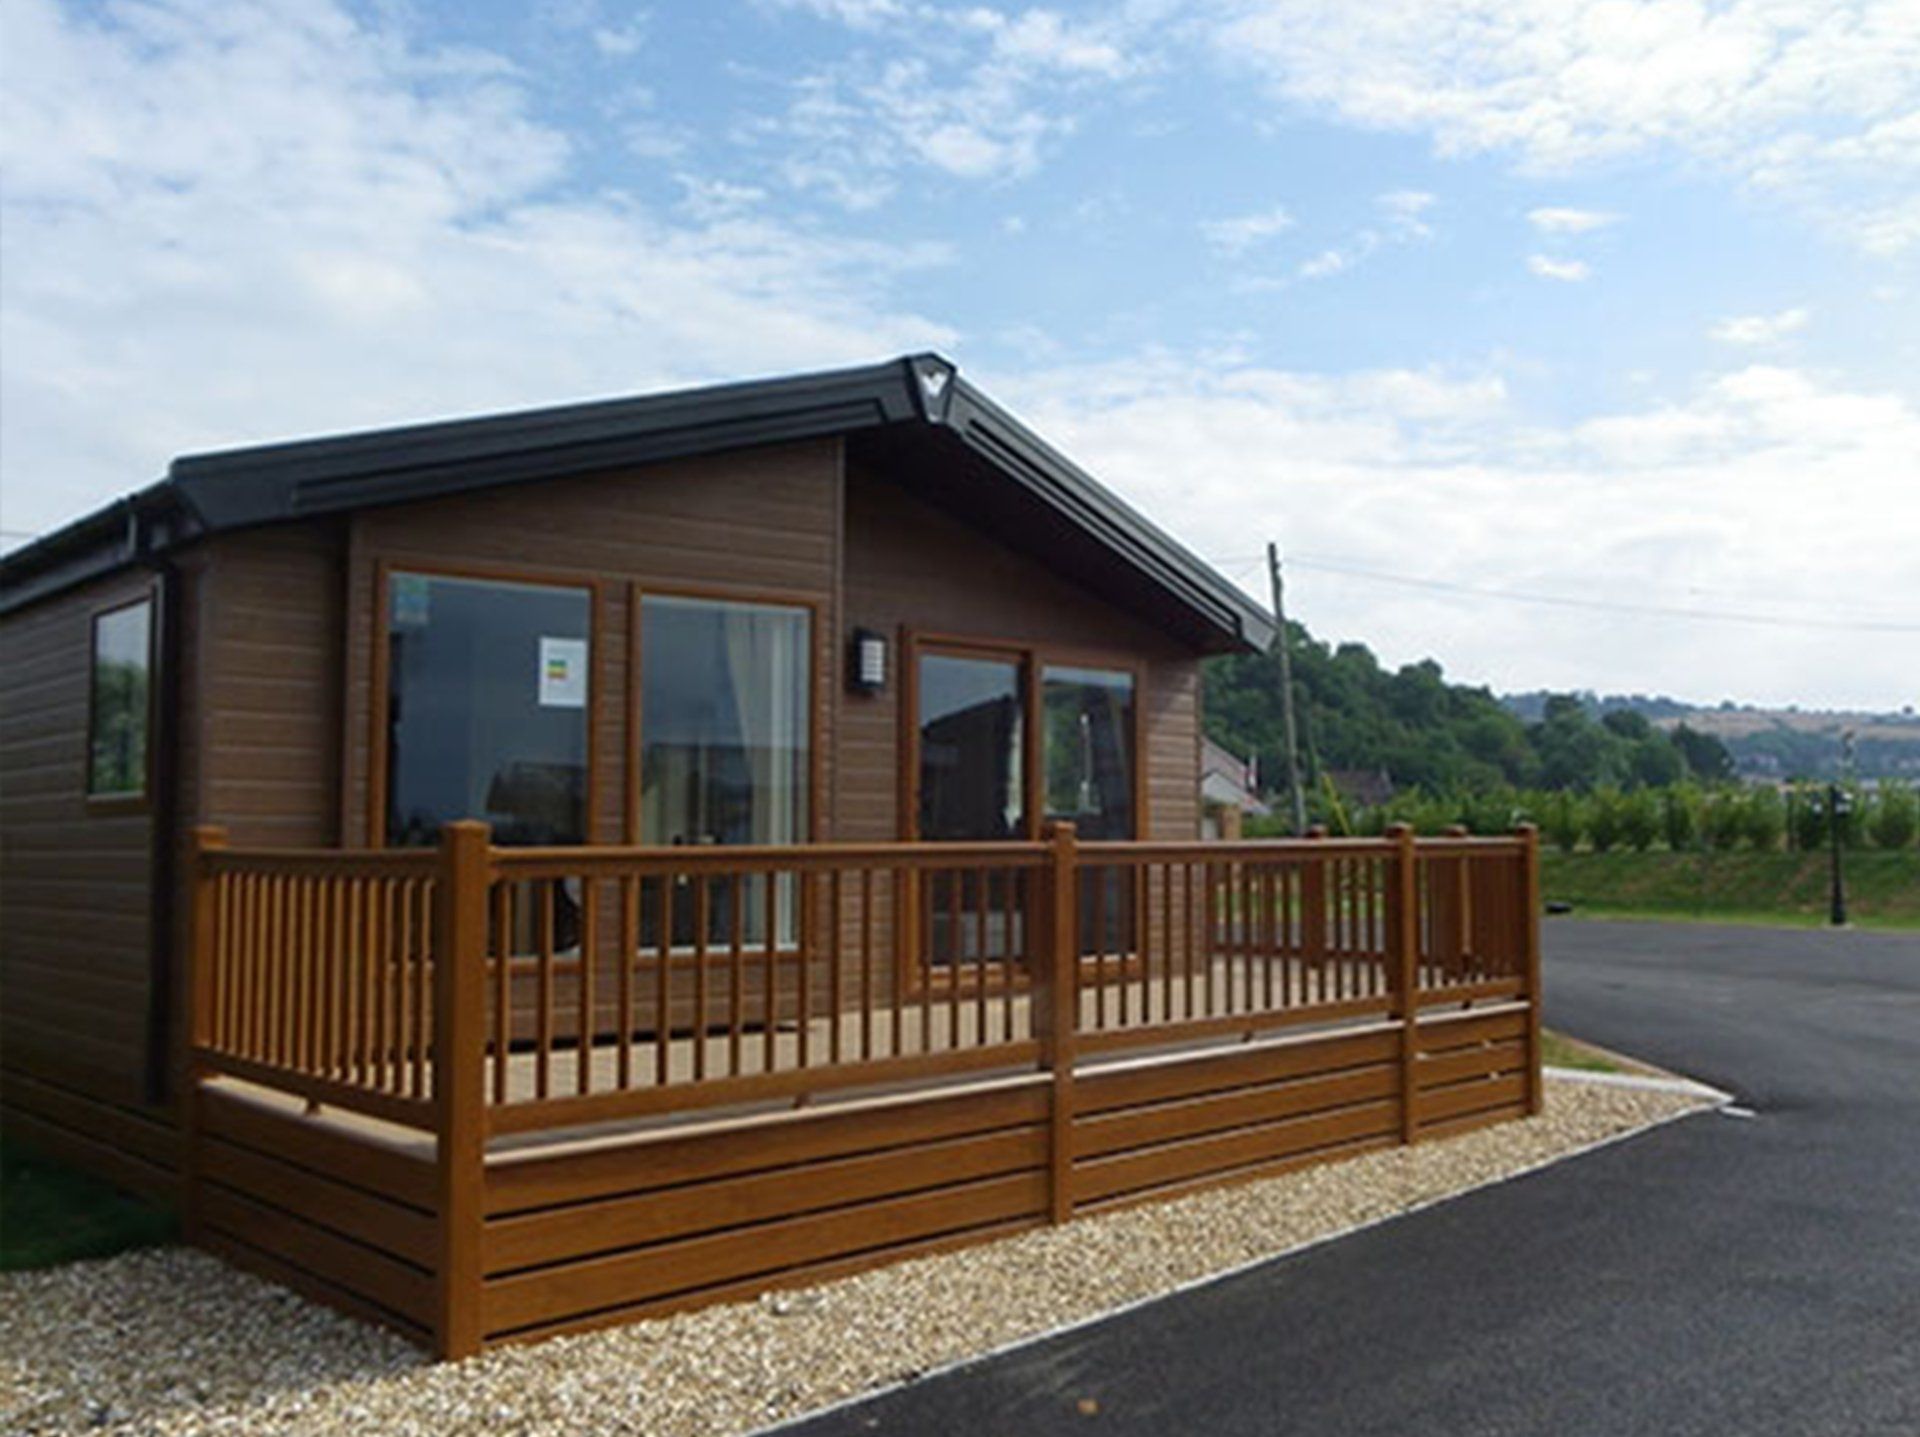 Outside a new holiday lodge for sale in Somerset. - Riverside Holiday Village